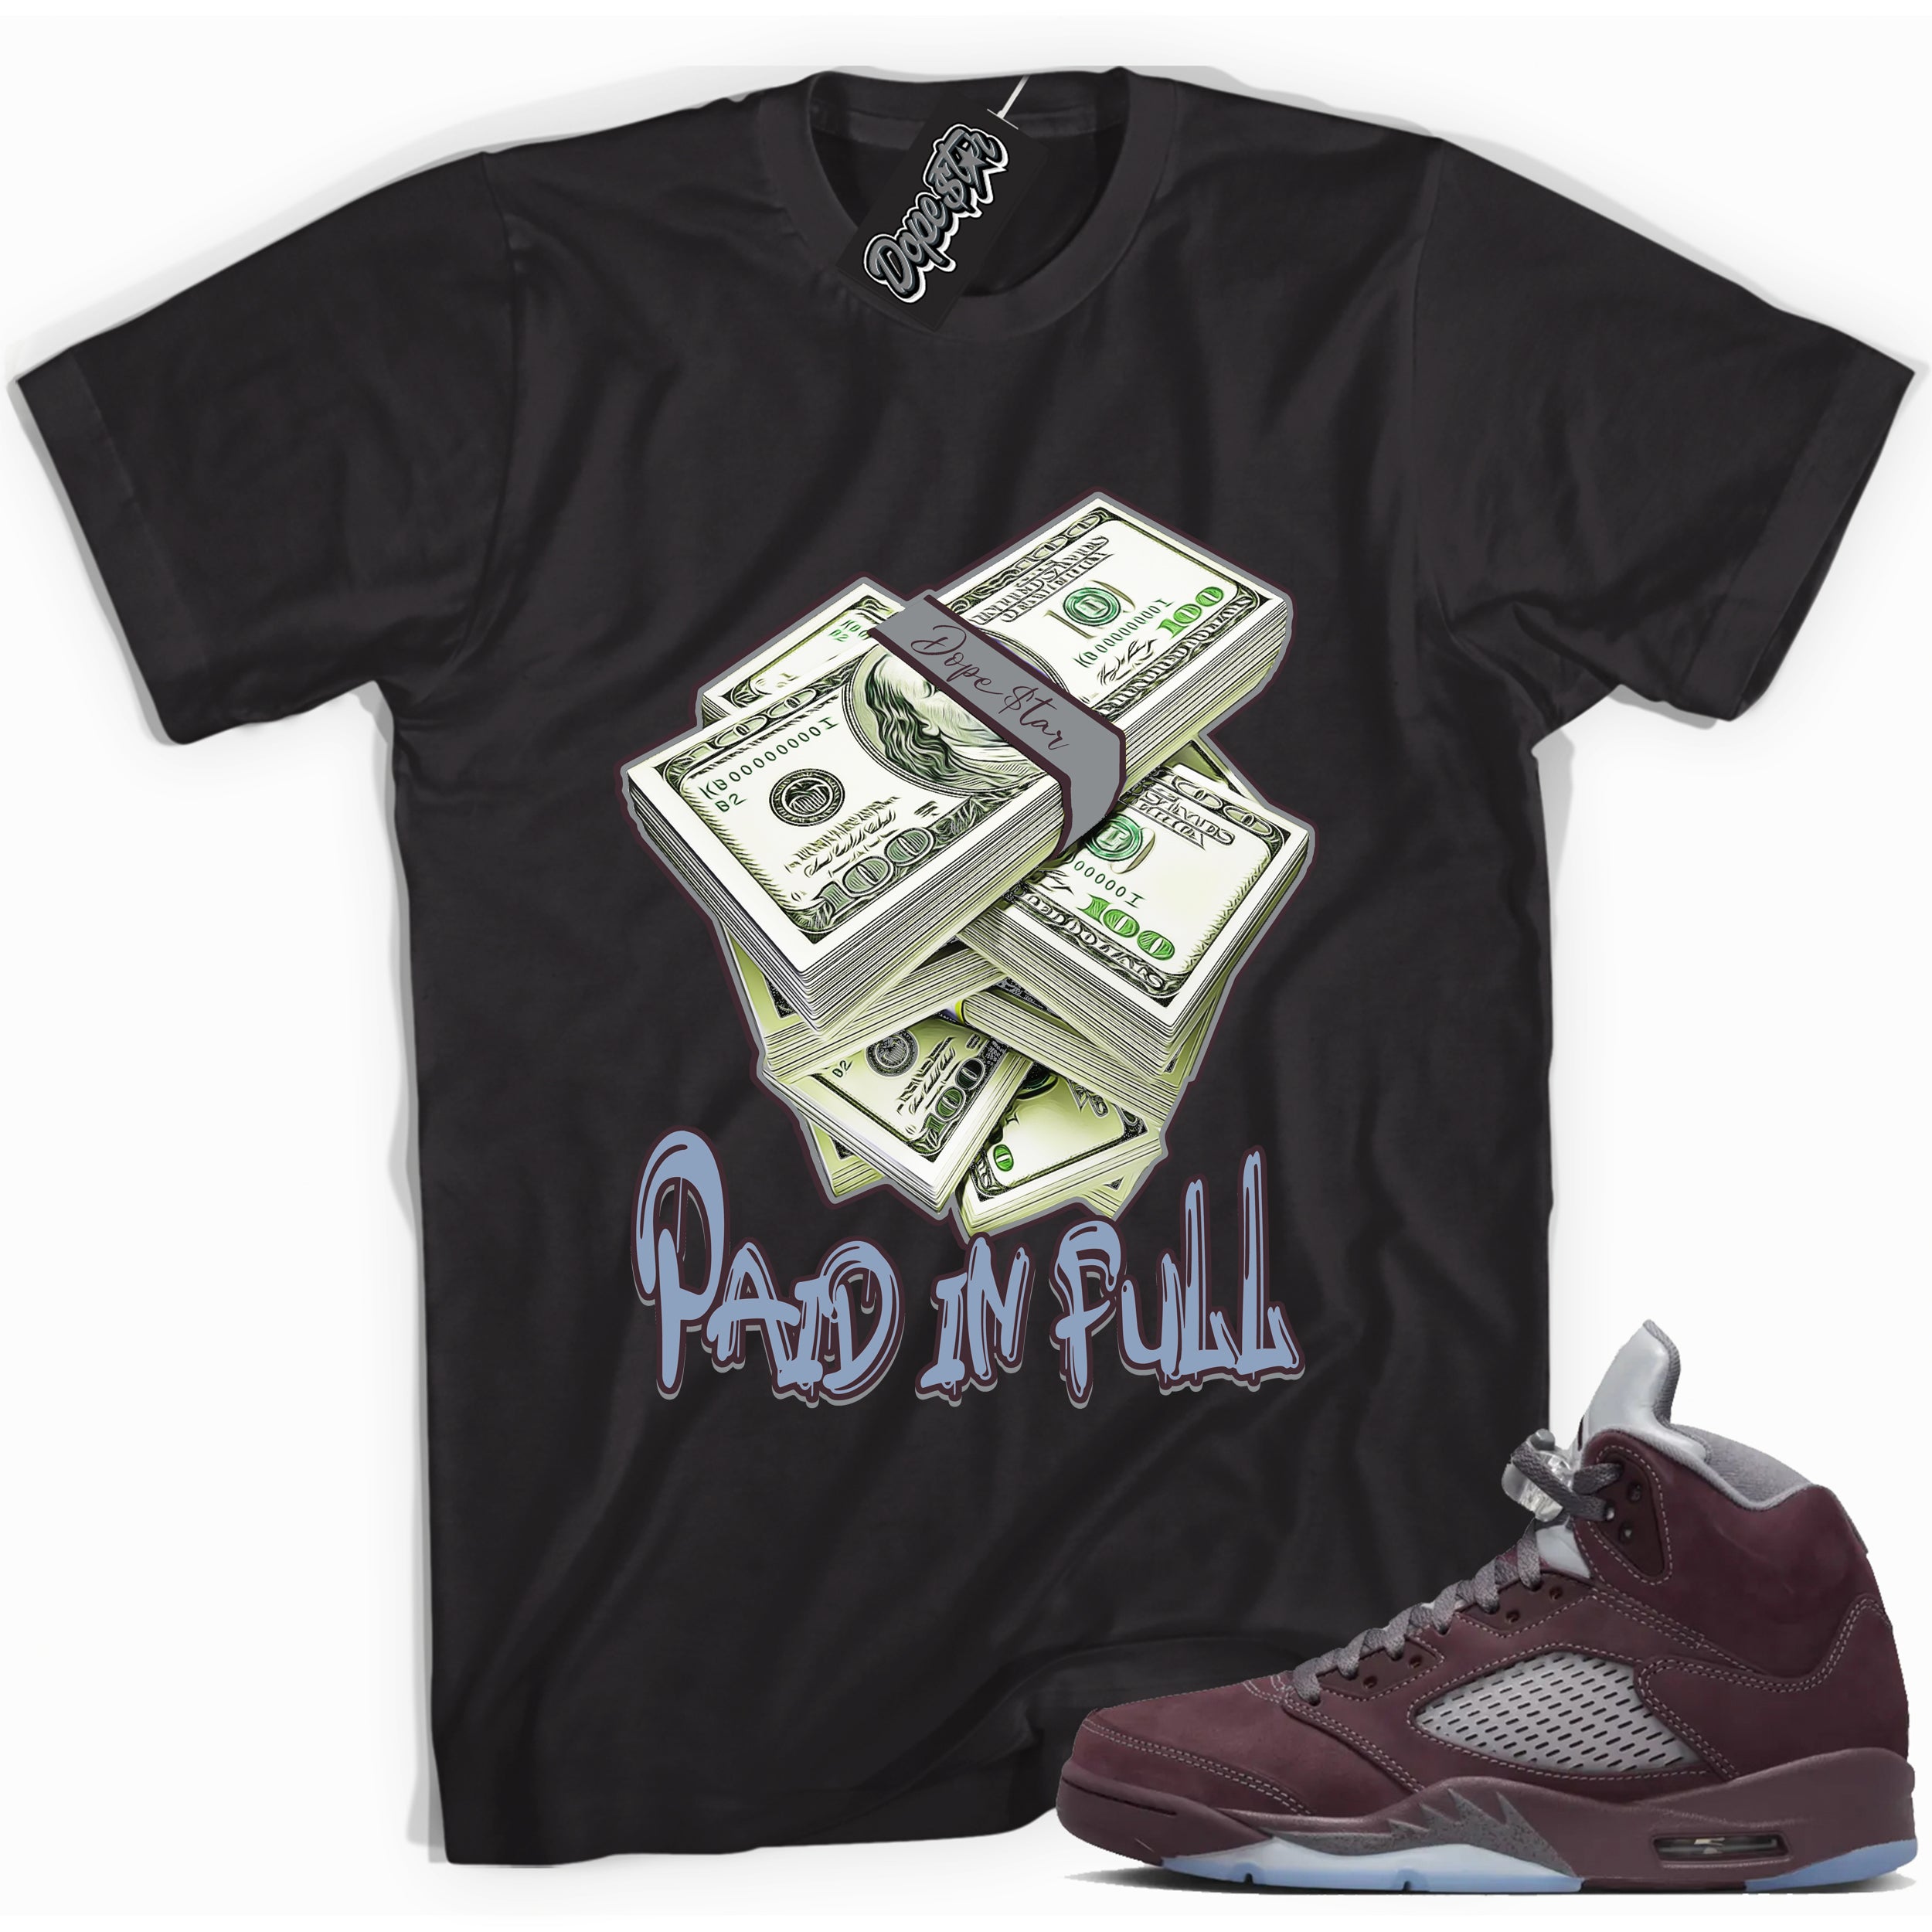 Cool Black graphic tee with “ Paid In Full ” print, that perfectly matches Air Jordan 5 Burgundy 2023 sneakers 